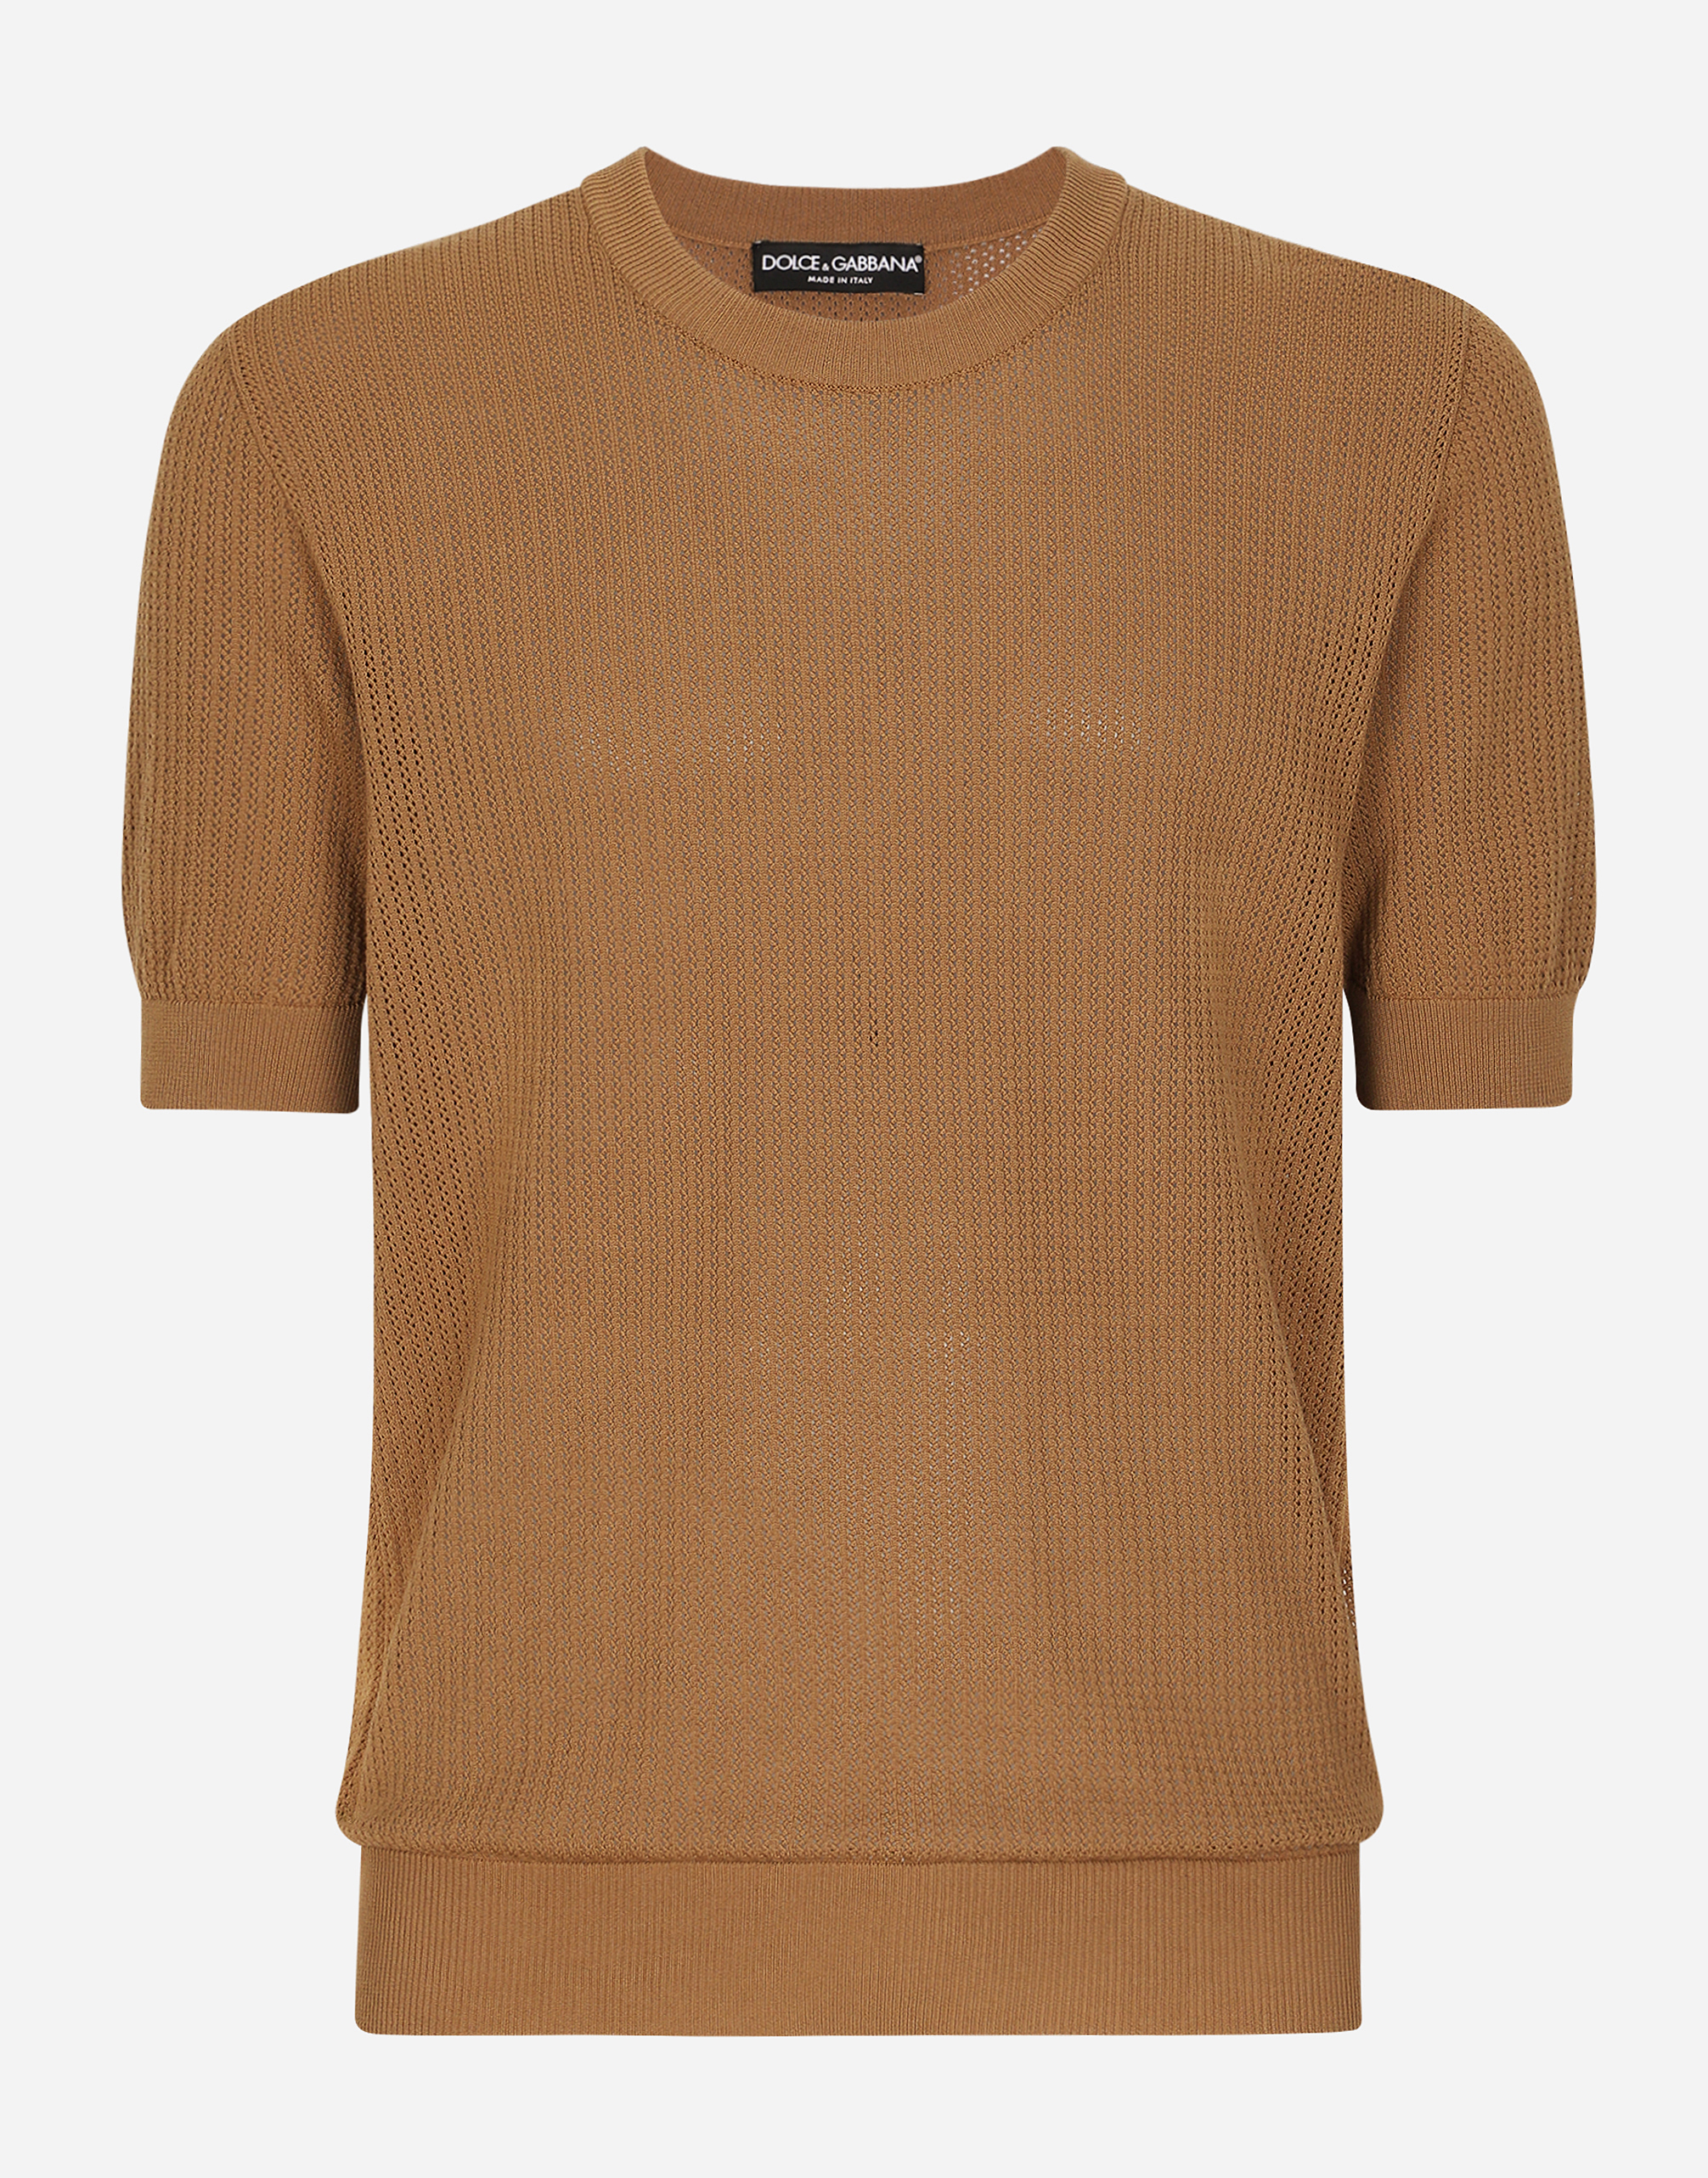 Dolce & Gabbana Cotton Sweater With Logo Label In Beige